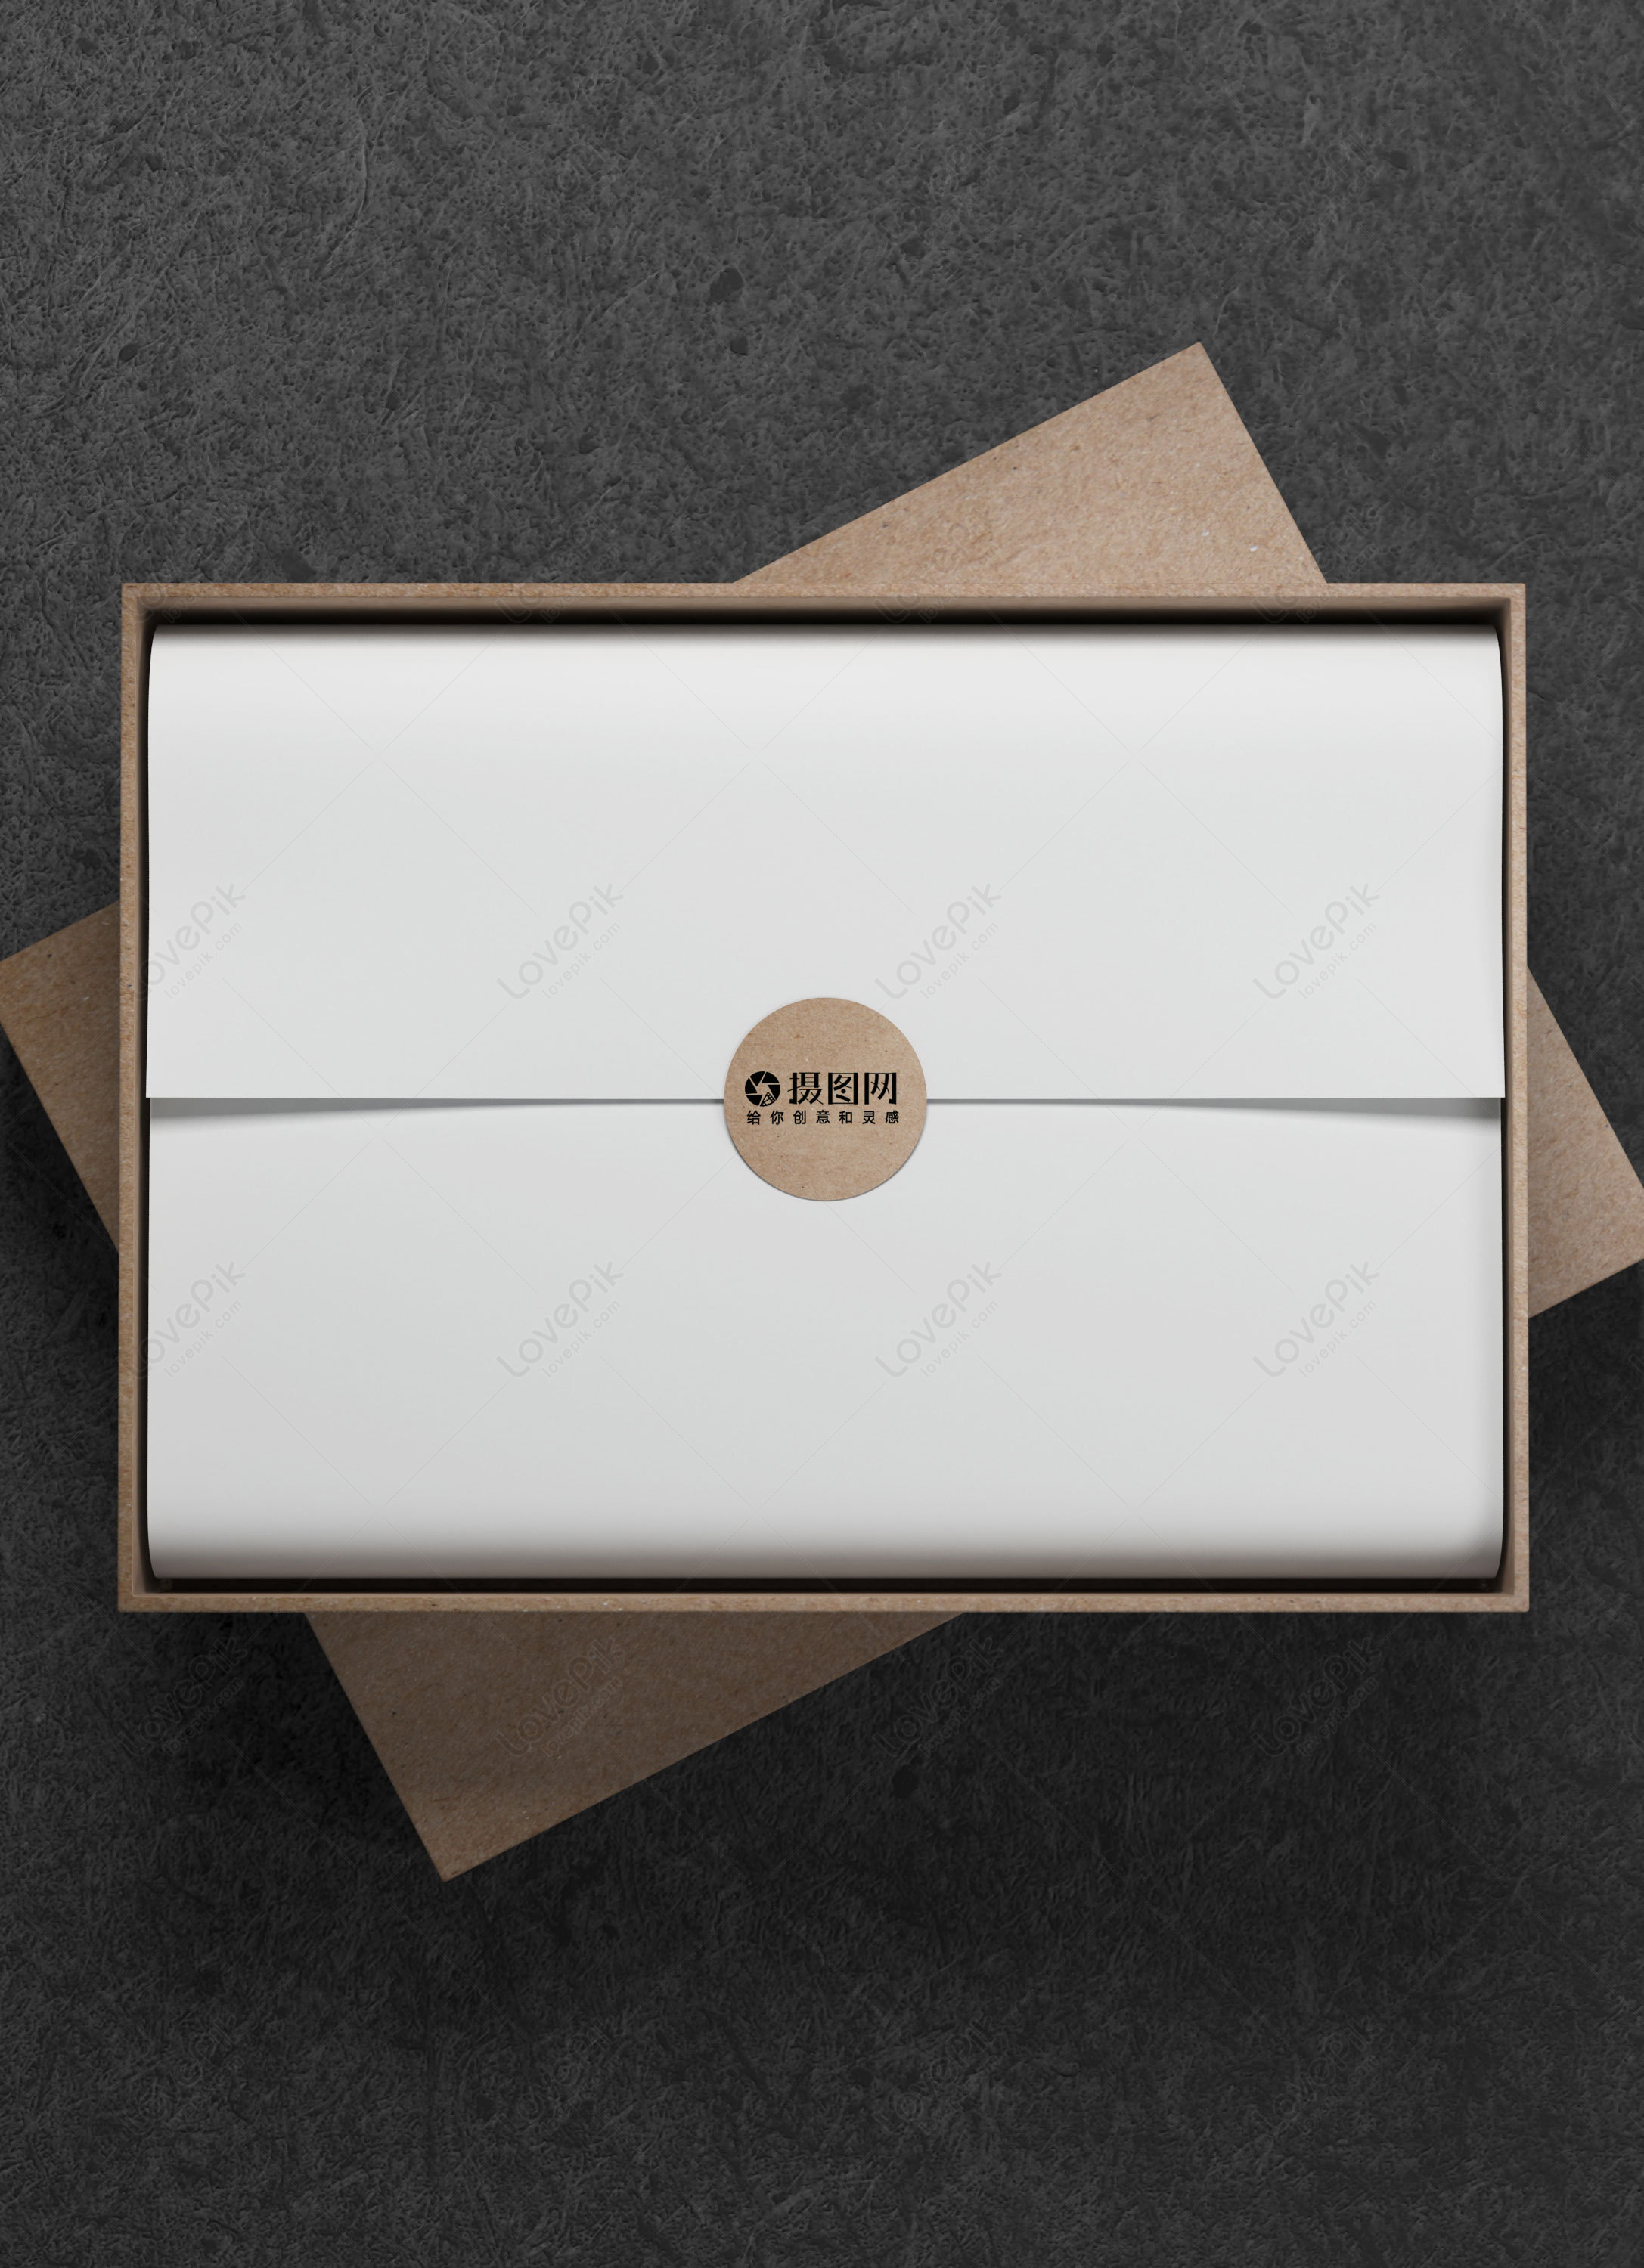 Download Wooden gift box mockup template image_picture free ...